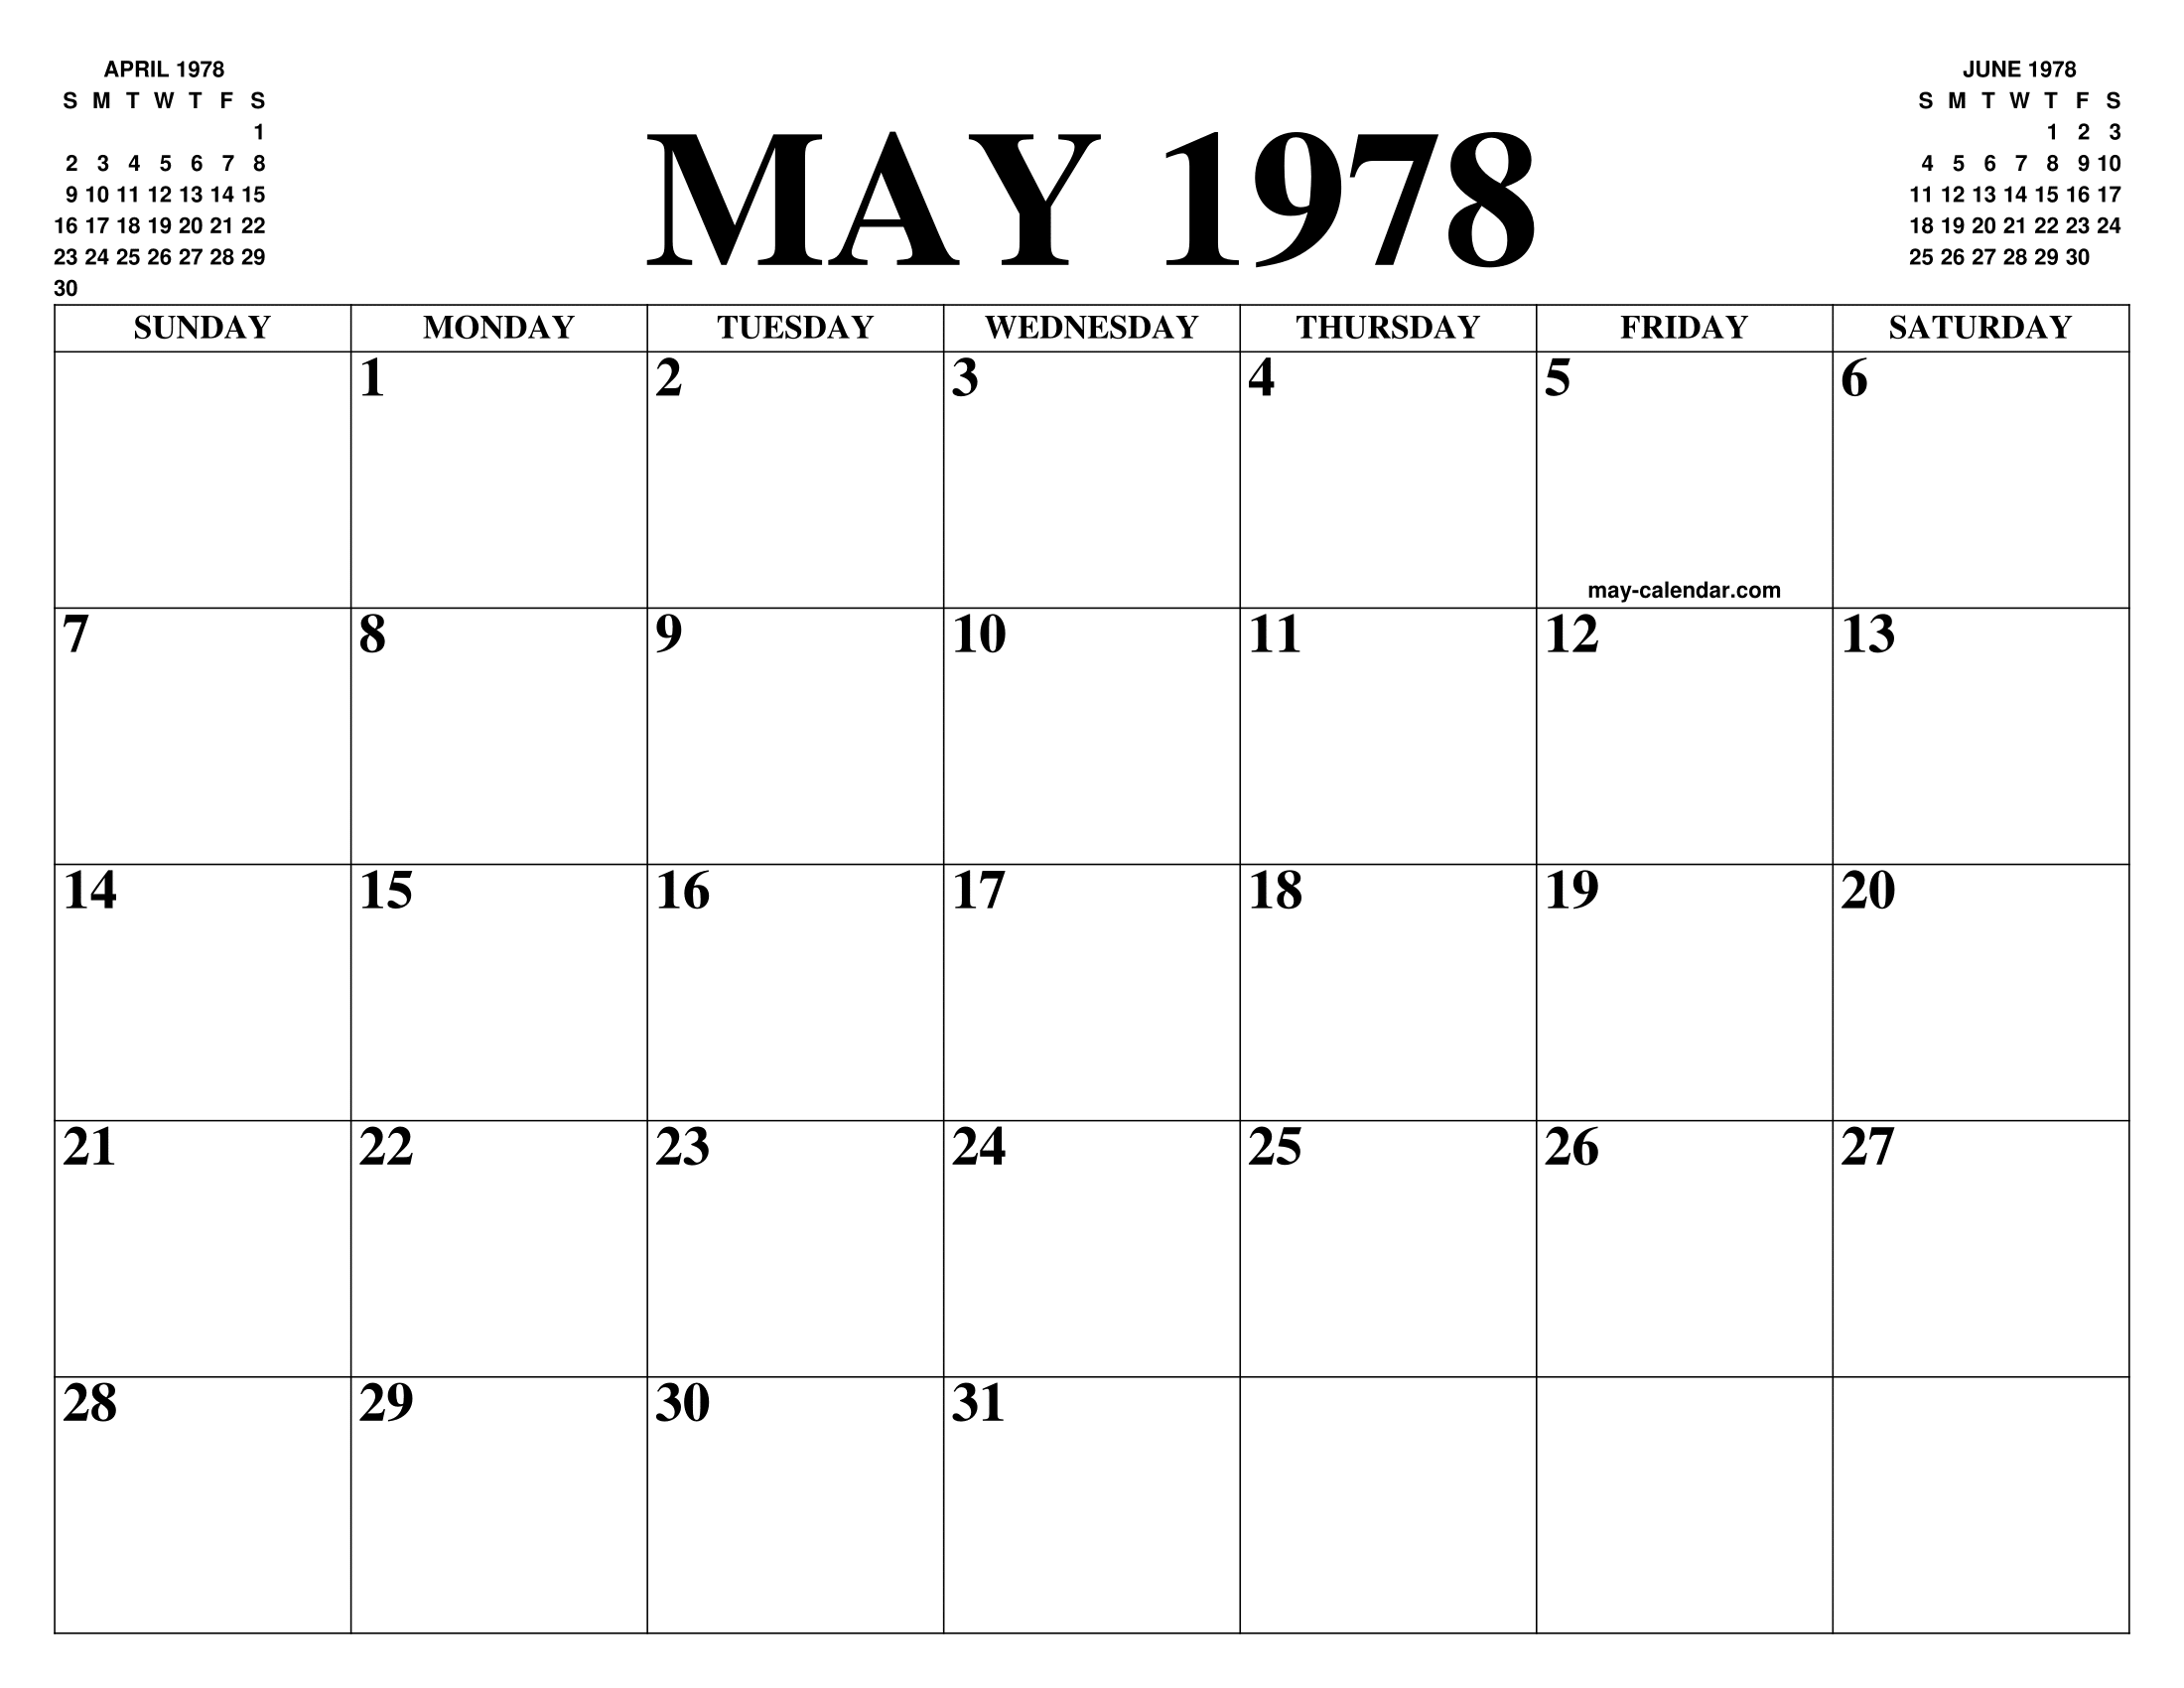 MAY 1978 CALENDAR OF THE MONTH: FREE PRINTABLE MAY CALENDAR OF THE YEAR